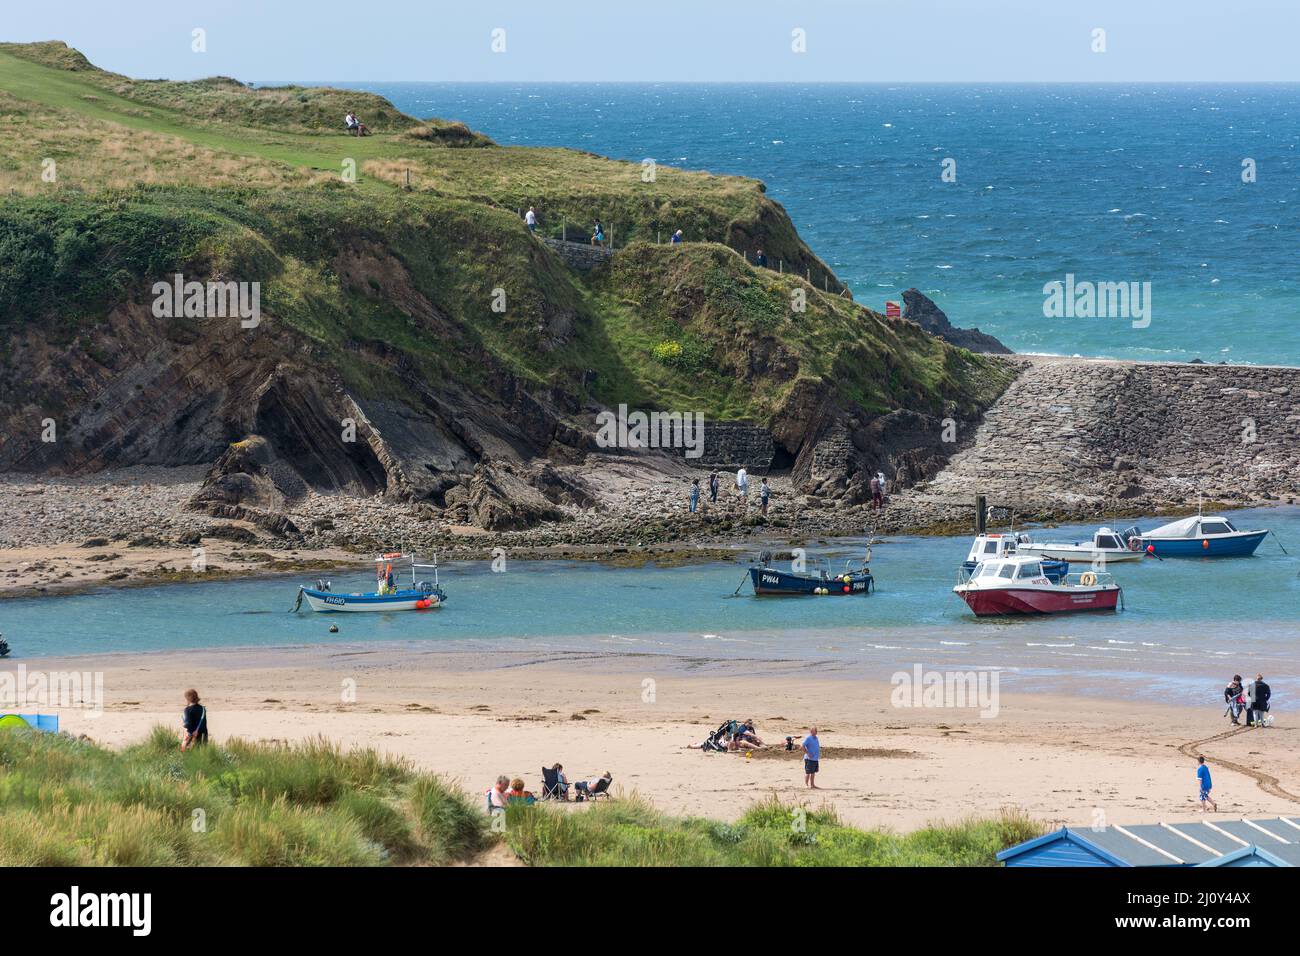 BUDE, CORNWALL, UK - AUGUST 15 :  Beach and harbour in Bude in Cornwall on August 15, 2013. Unidentified people Stock Photo